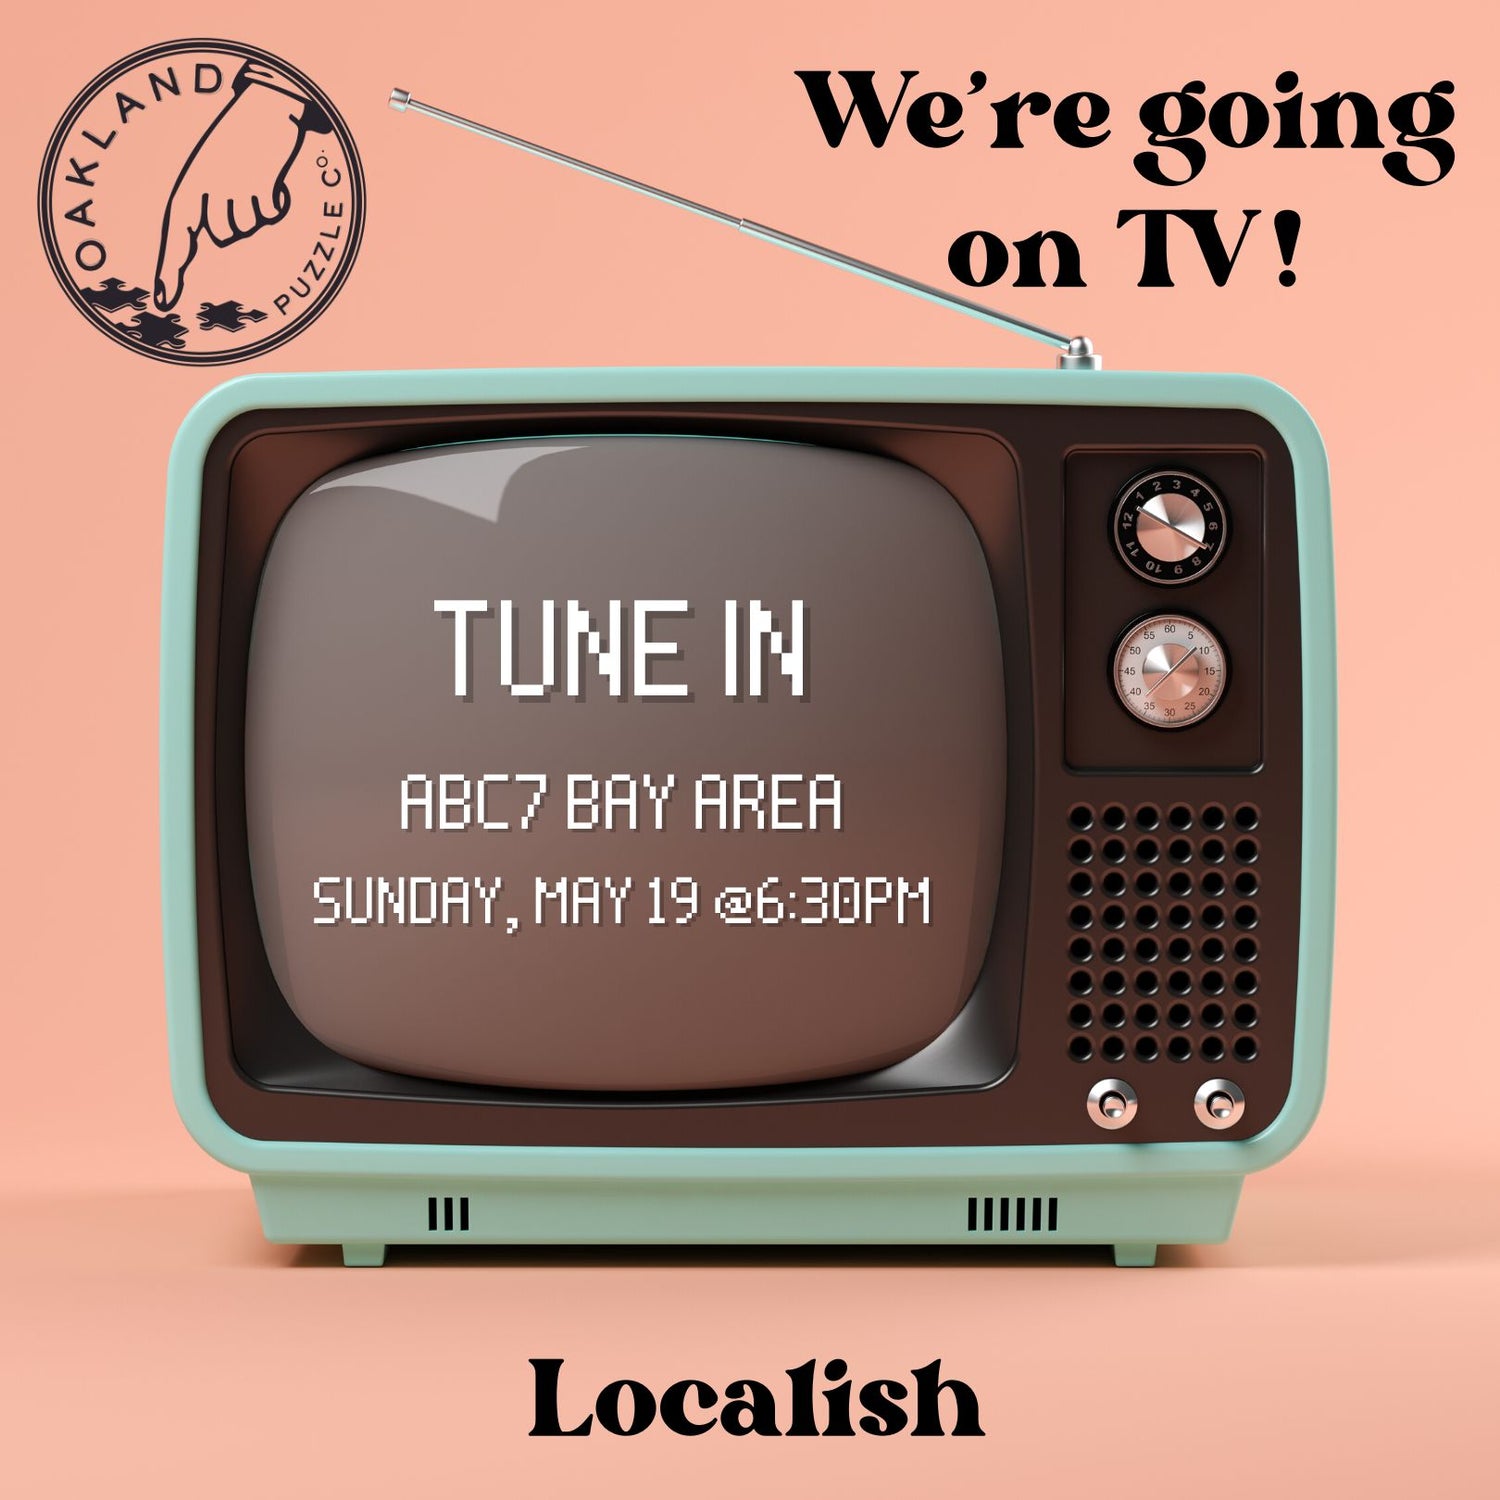 Image is a peach background with the Oakland Puzzle Company logo in the top corner, "We're going on TV!" in the other top corner, and "Localish" across the bottom in stylish modern text. In the center is a vintage television with "TUNE IN, ABC7 BAY AREA, SUNDAY MAY 19 @6:30PM in a pixelated font